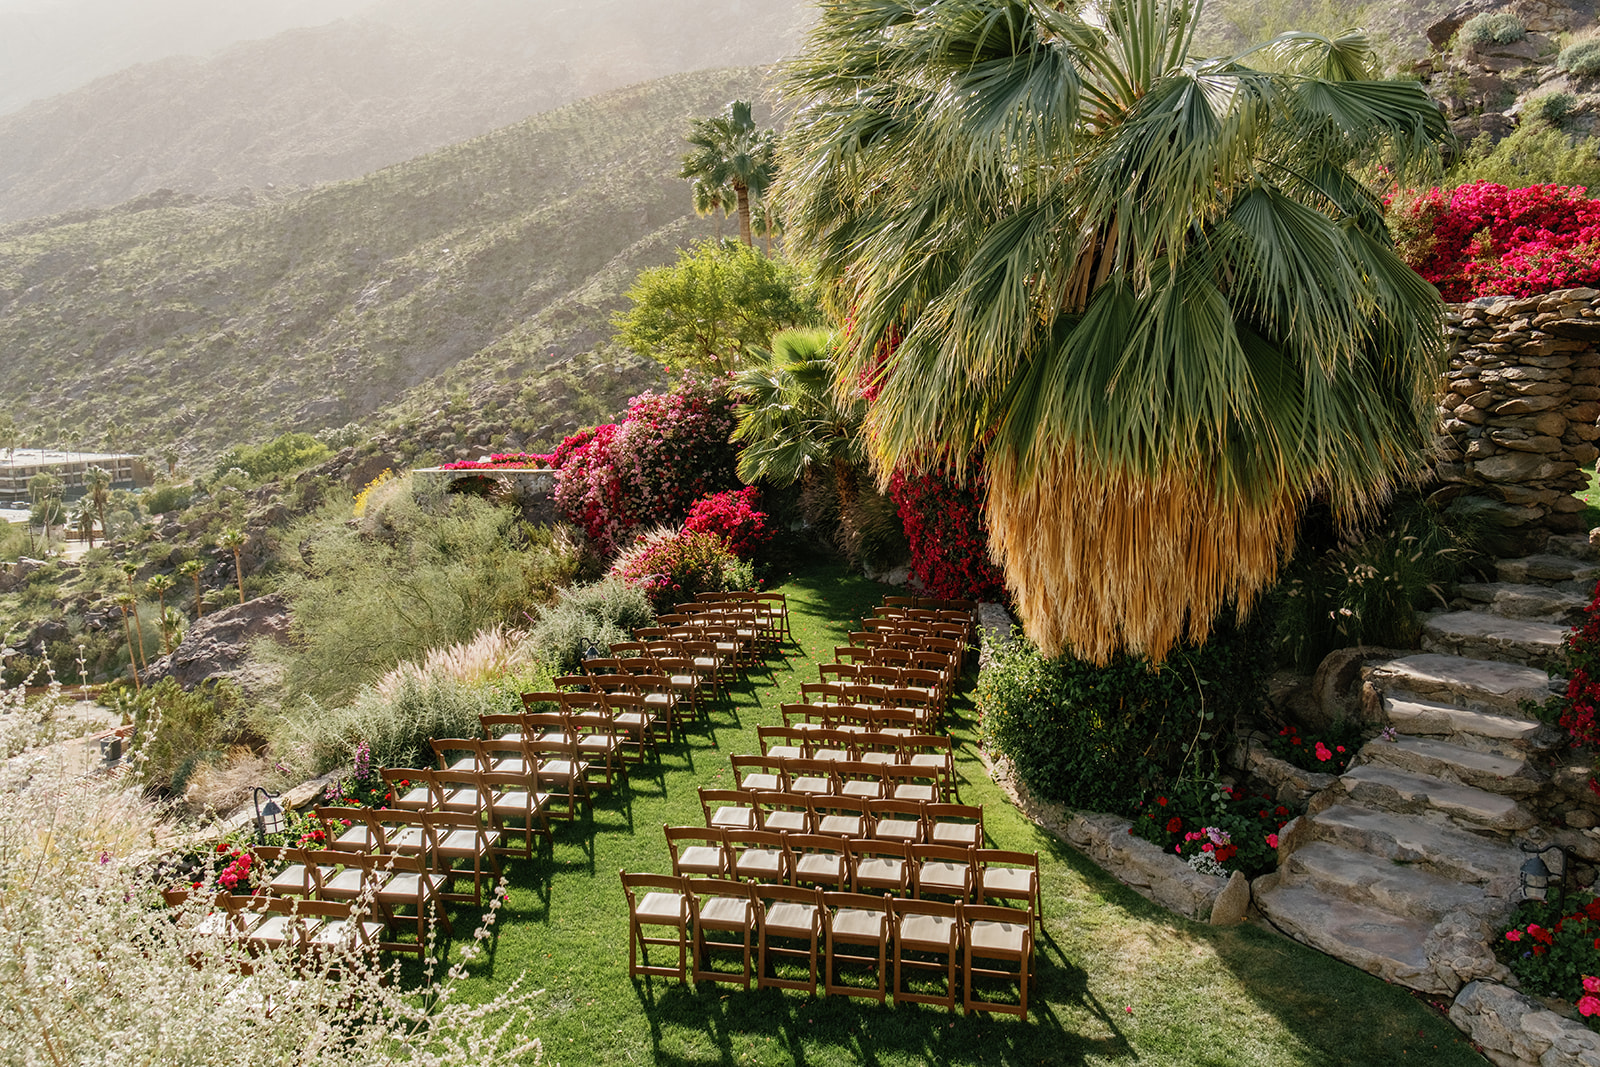 Wedding at O'Donnell House Palm Springs